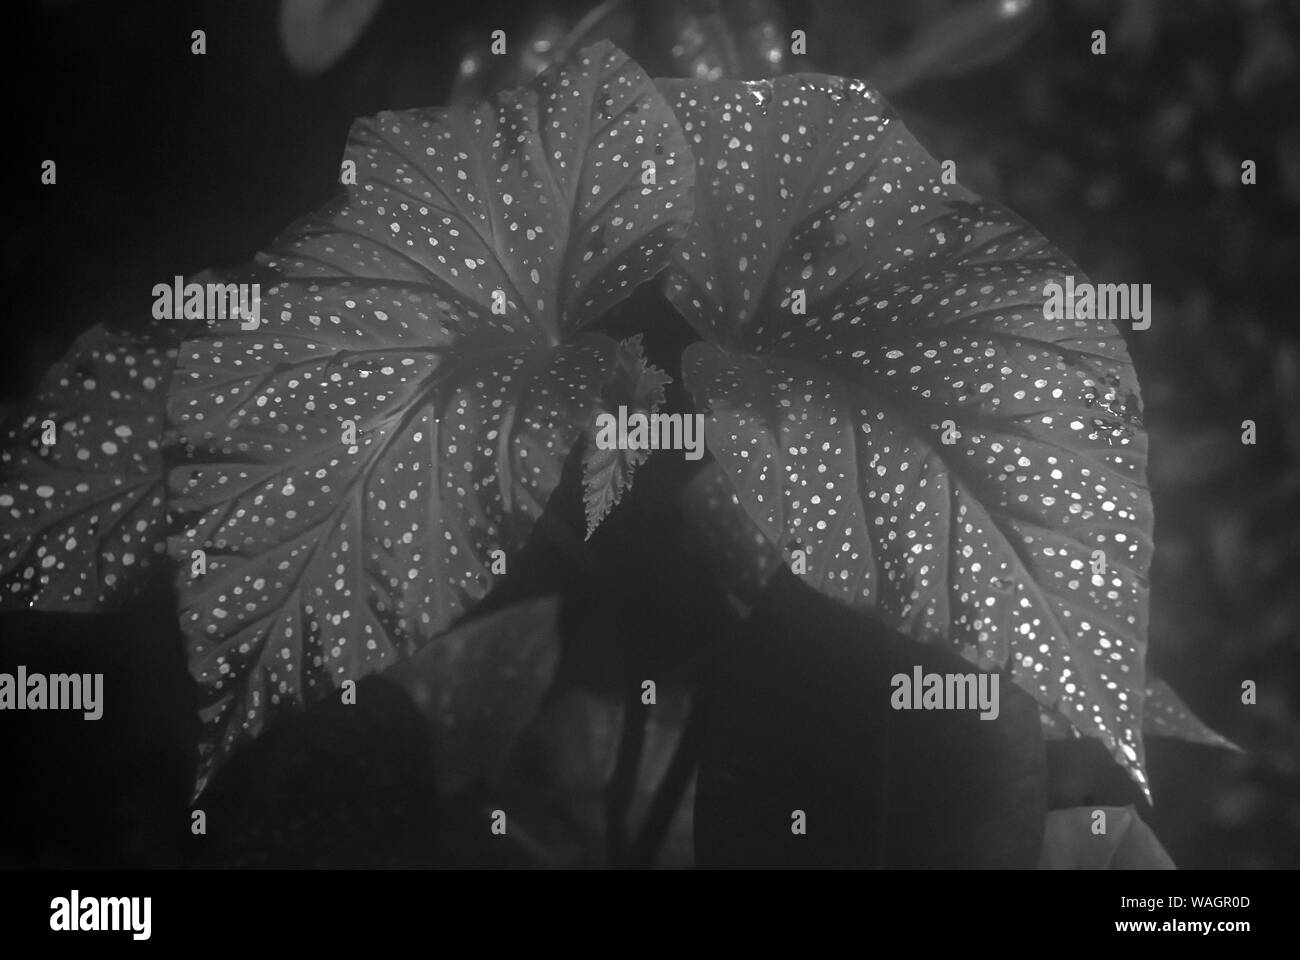 monochrome blurred misty floral background with mottled leaves of begonia maculata in the foreground Stock Photo